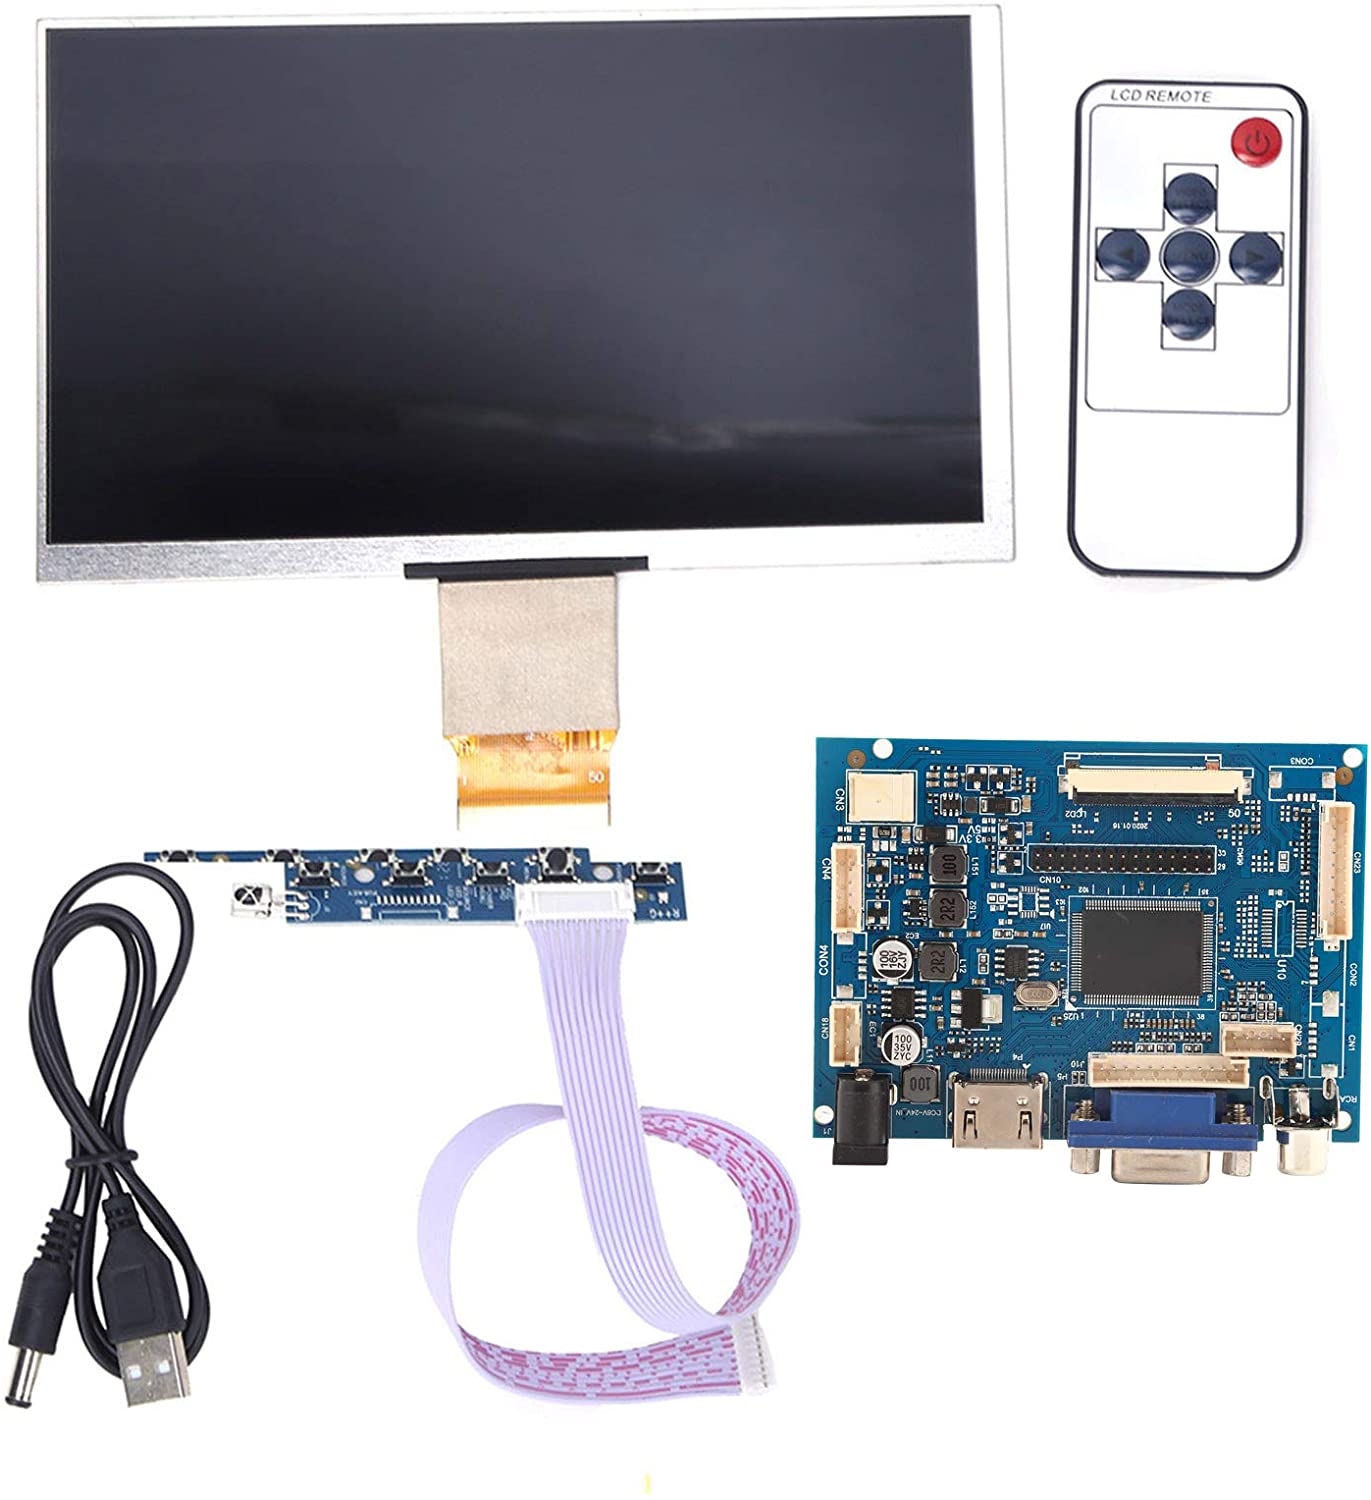 Pic of LCD screen (courtesy of Amazon)